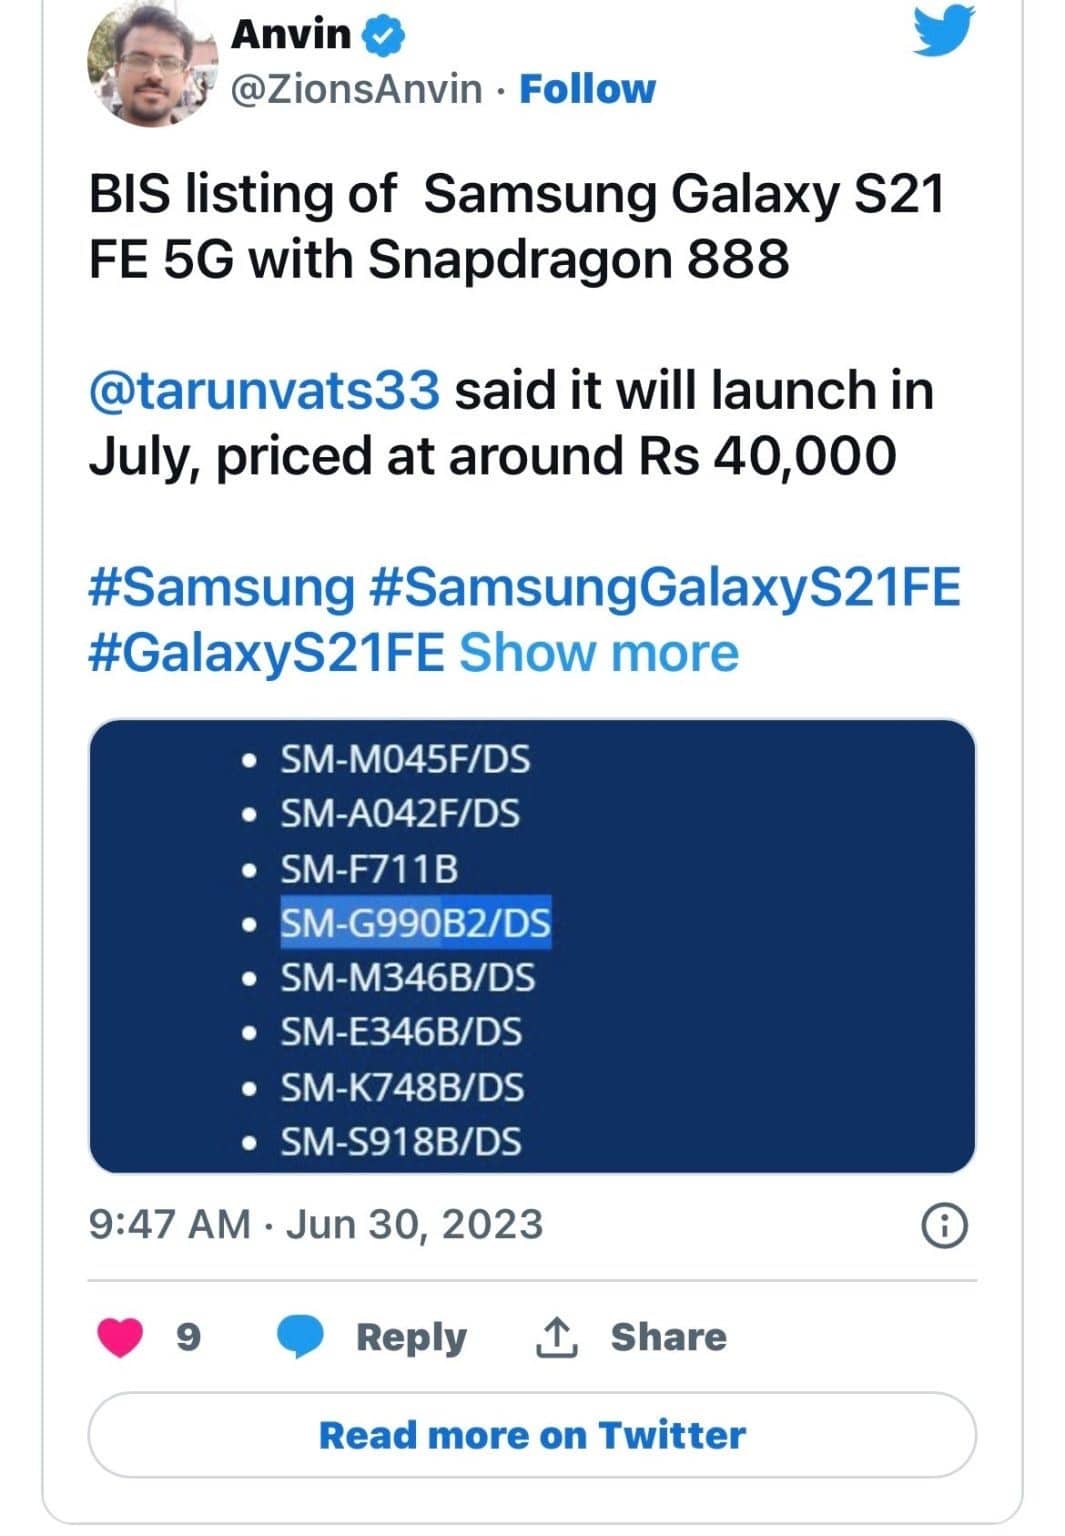 Samsung Galaxy S21 FE 5G gets new variant with Snapdragon 888 SoC, India  price set at Rs 49,999 - India Today